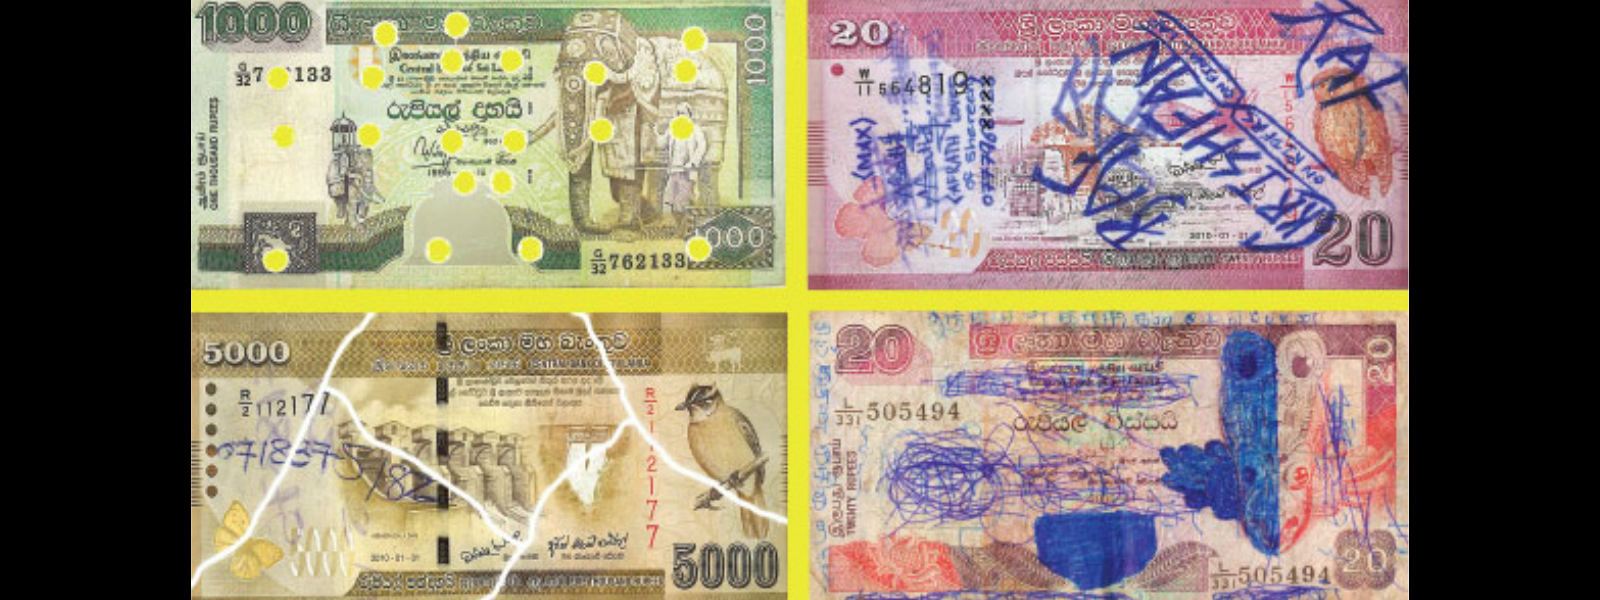 Defaced currency notes exchange: Deadline to end